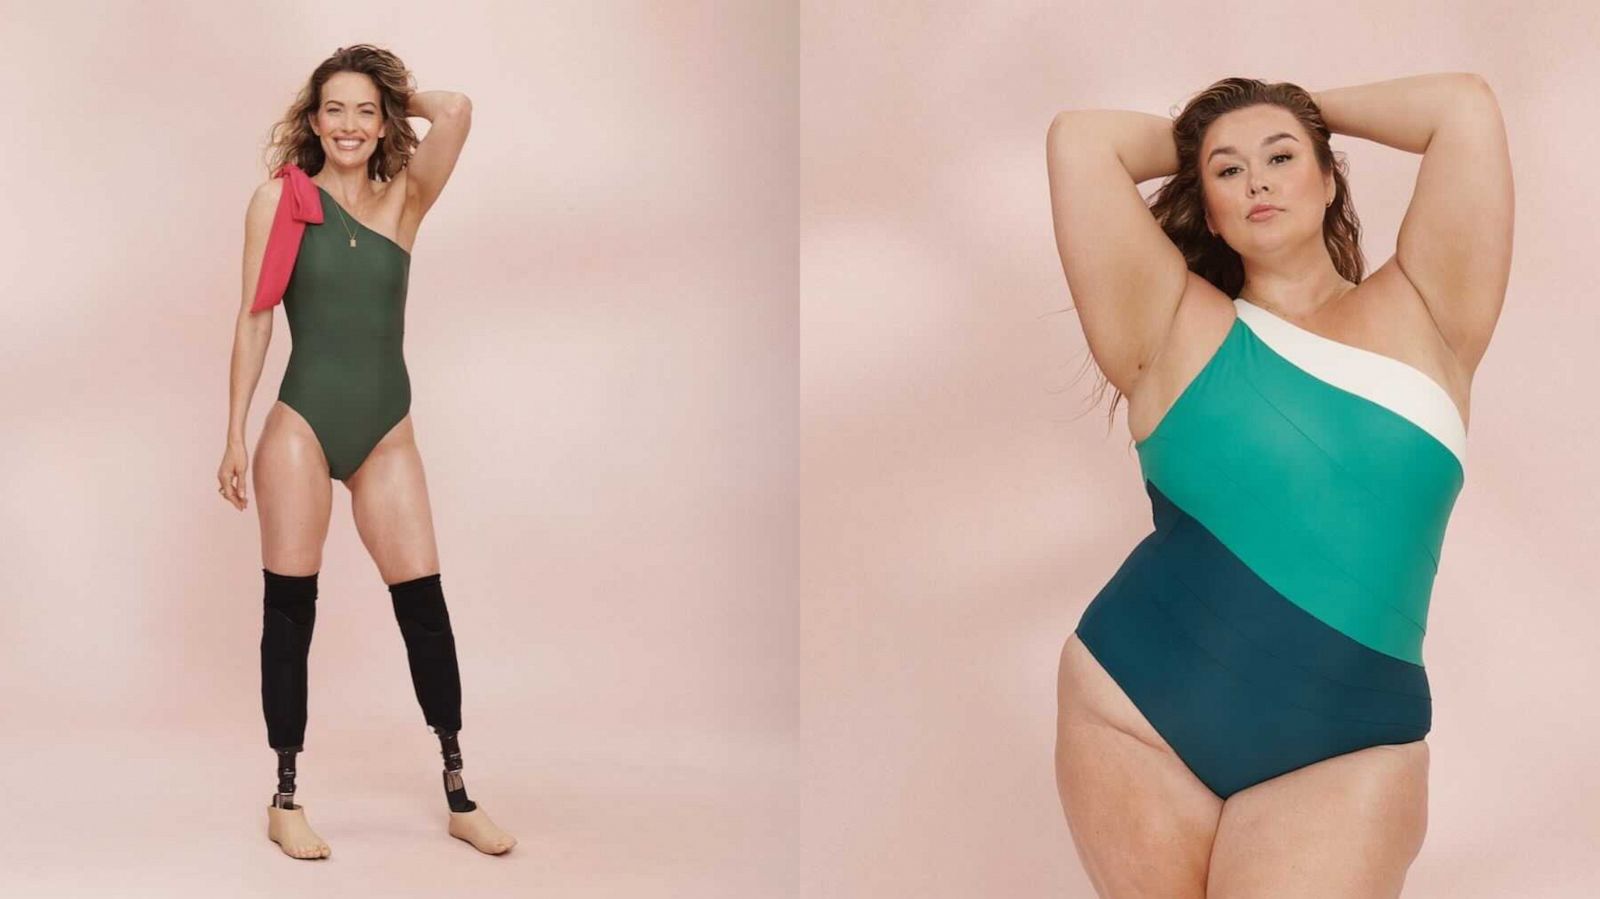 10 plus-size bathing suits for summer: Summersalt, Old Navy, and